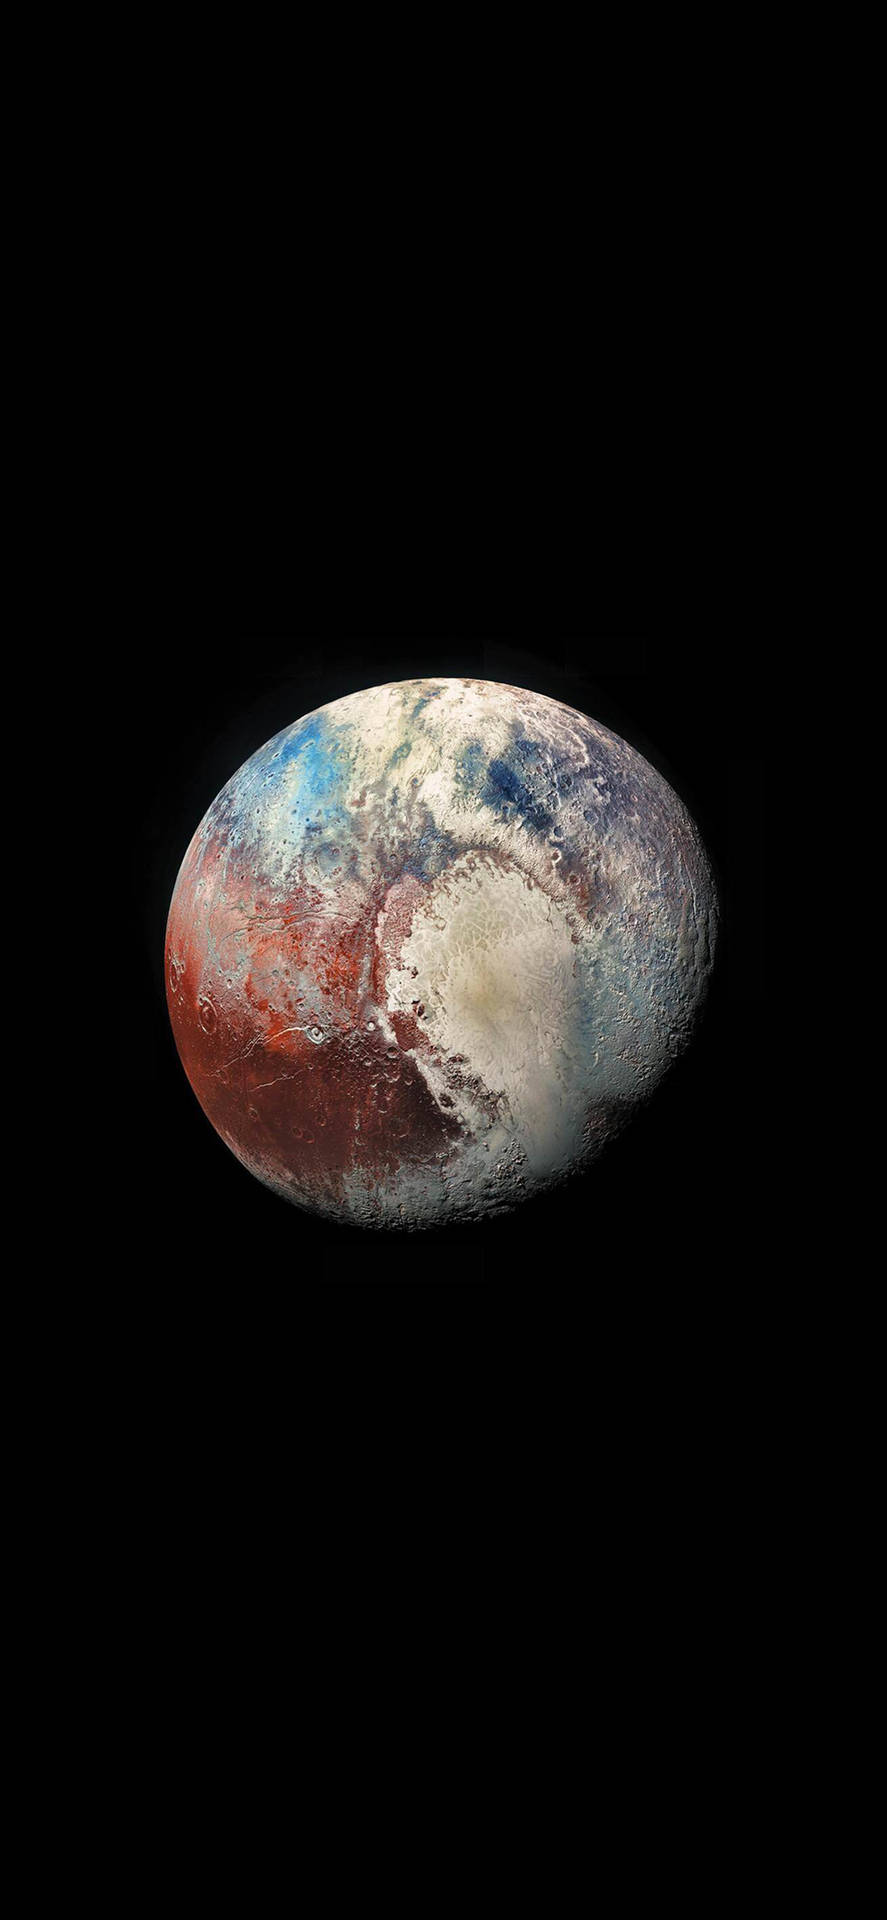 Pluto's Mysterious Surface Revealed in Stunning Amoled Wallpaper